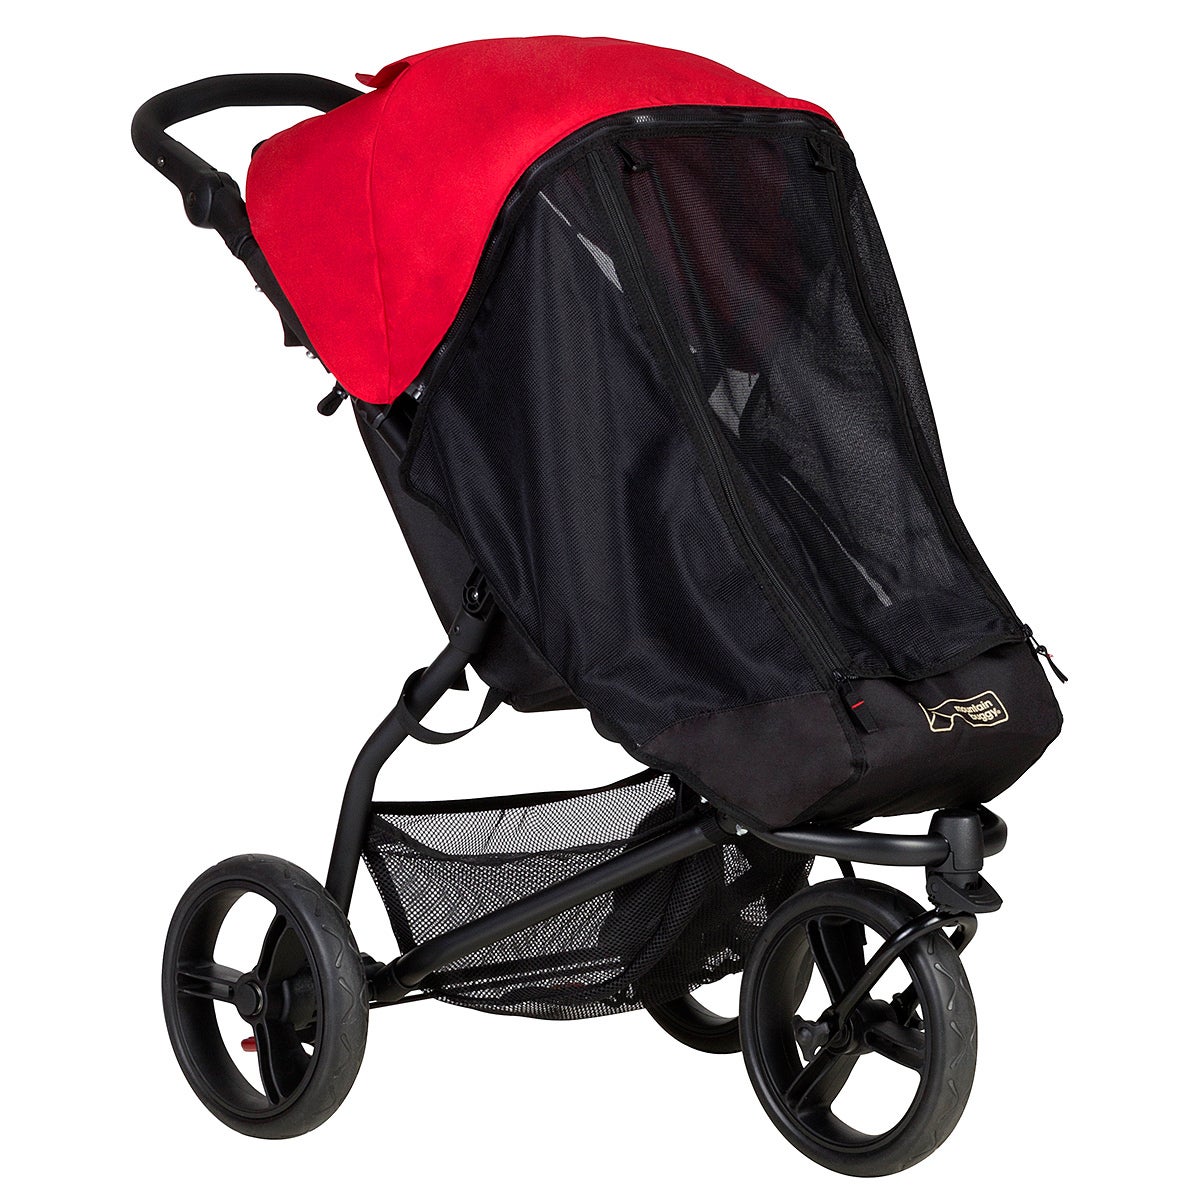 Mountain Buggy Sun Cover for Carrycot Plus for 2015 Swift and Mb Mini Strollers 